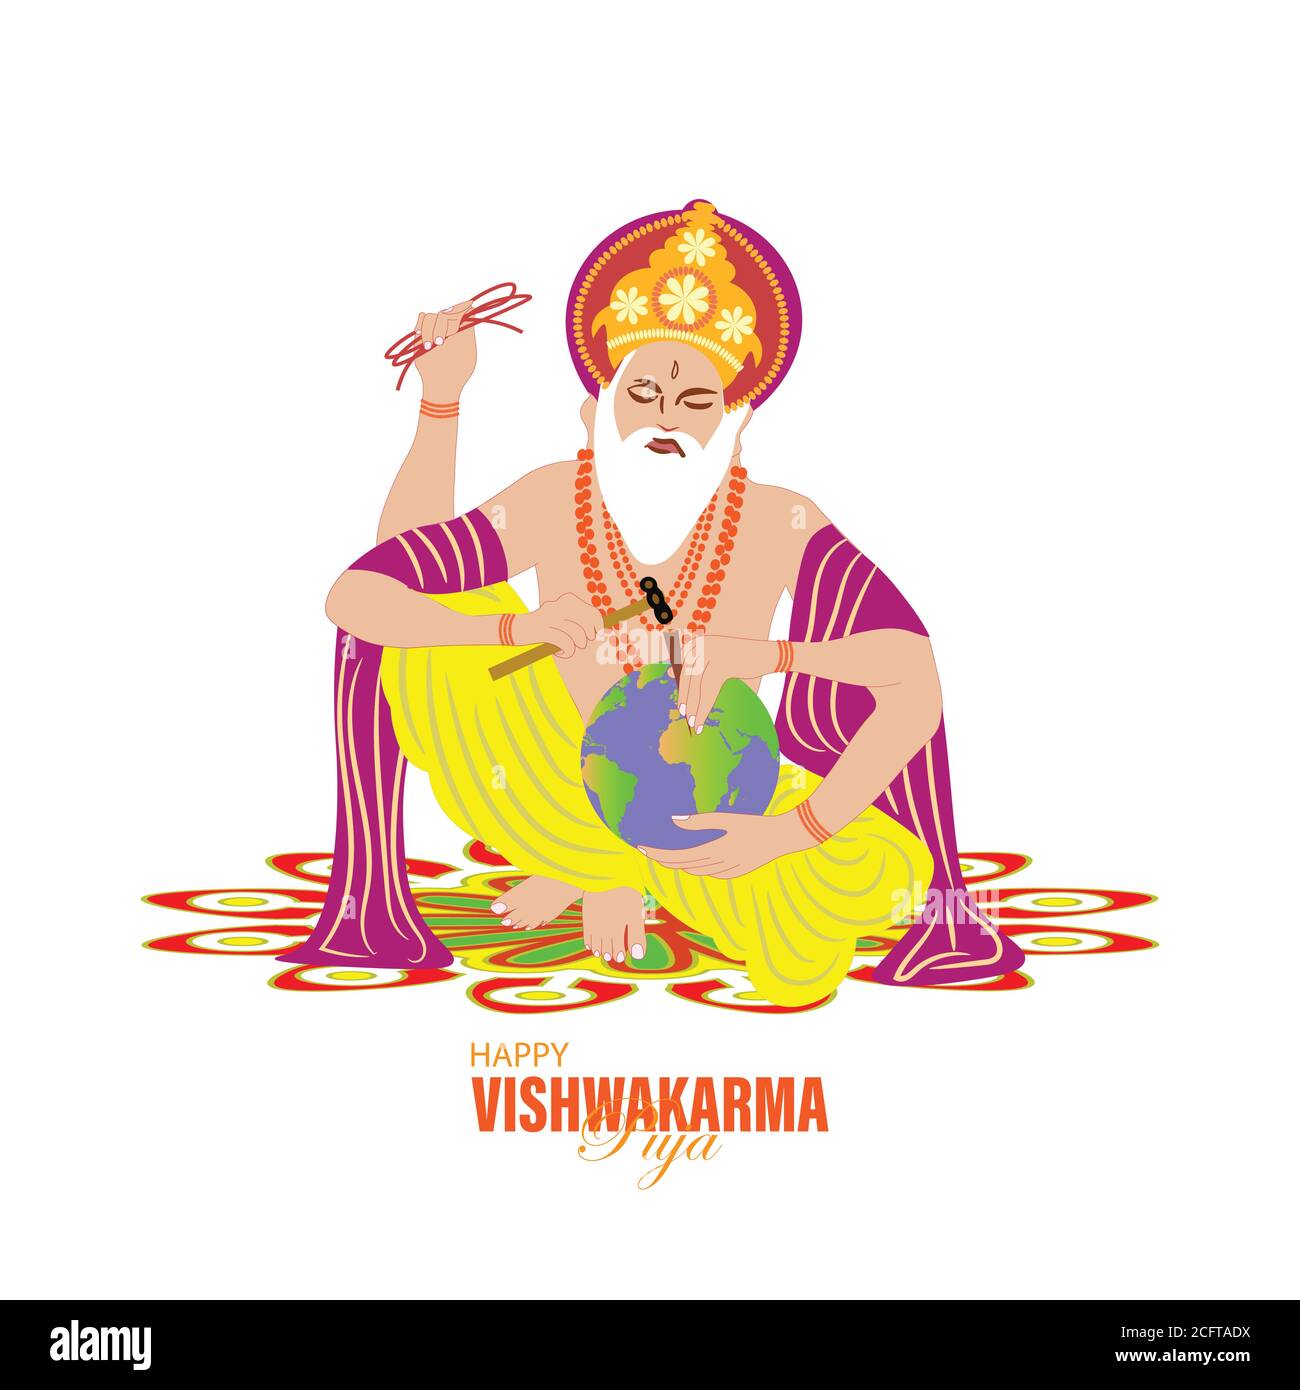 Vishwakarma God of Hindus, who is believed to be the architect of ...